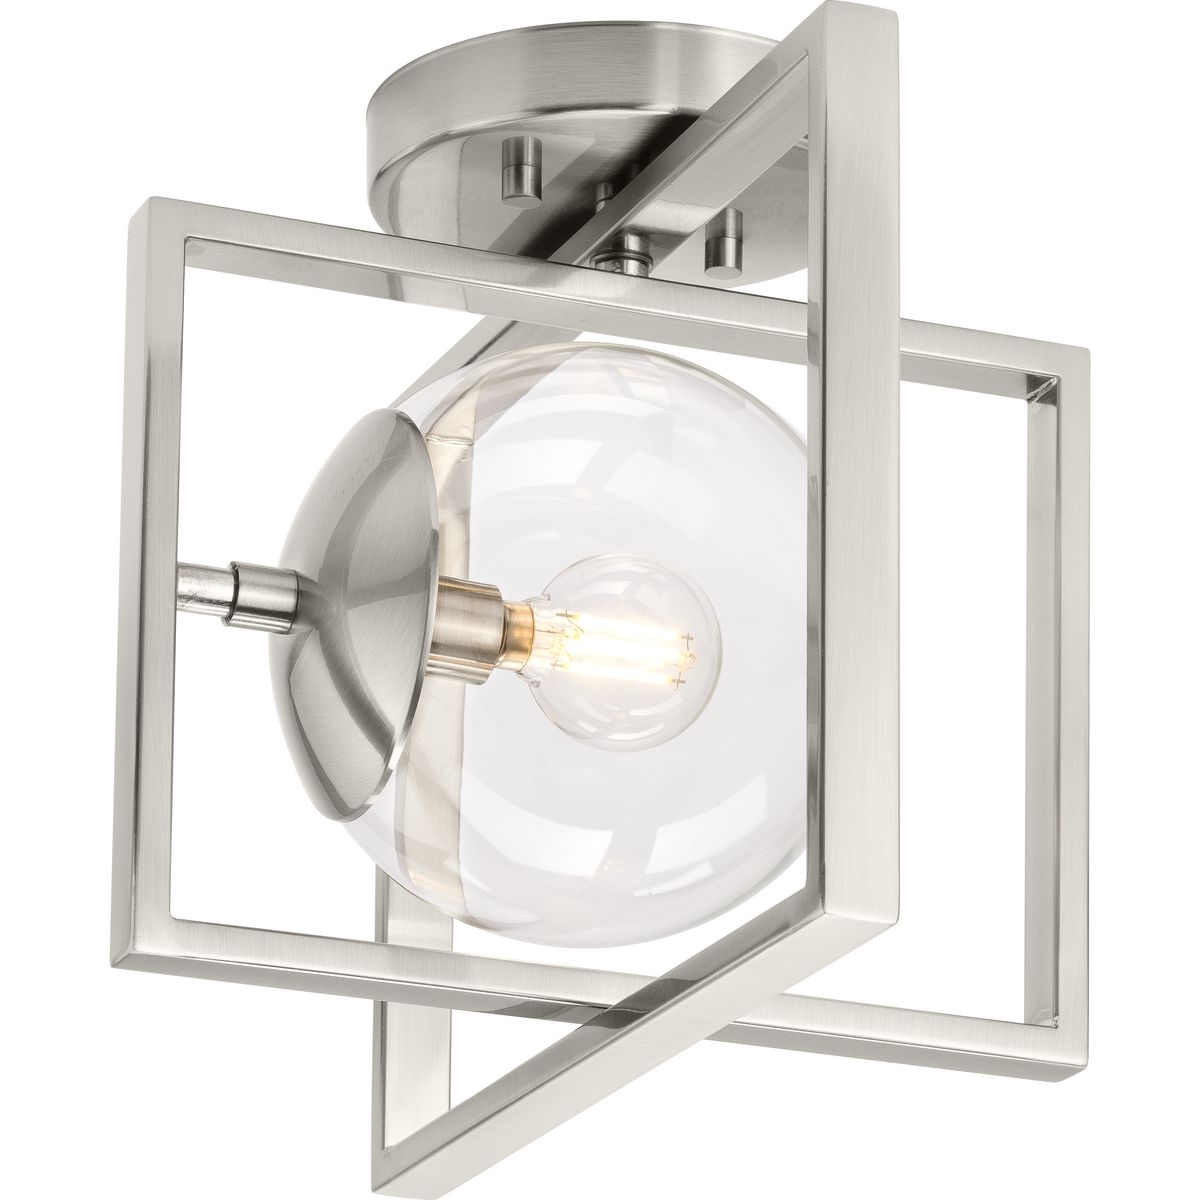 Atwell Collection 10" One-Light Mid-Century Modern Brushed Nickel Clear Glass Semi-Flush Mount Light - Dry Location Listed